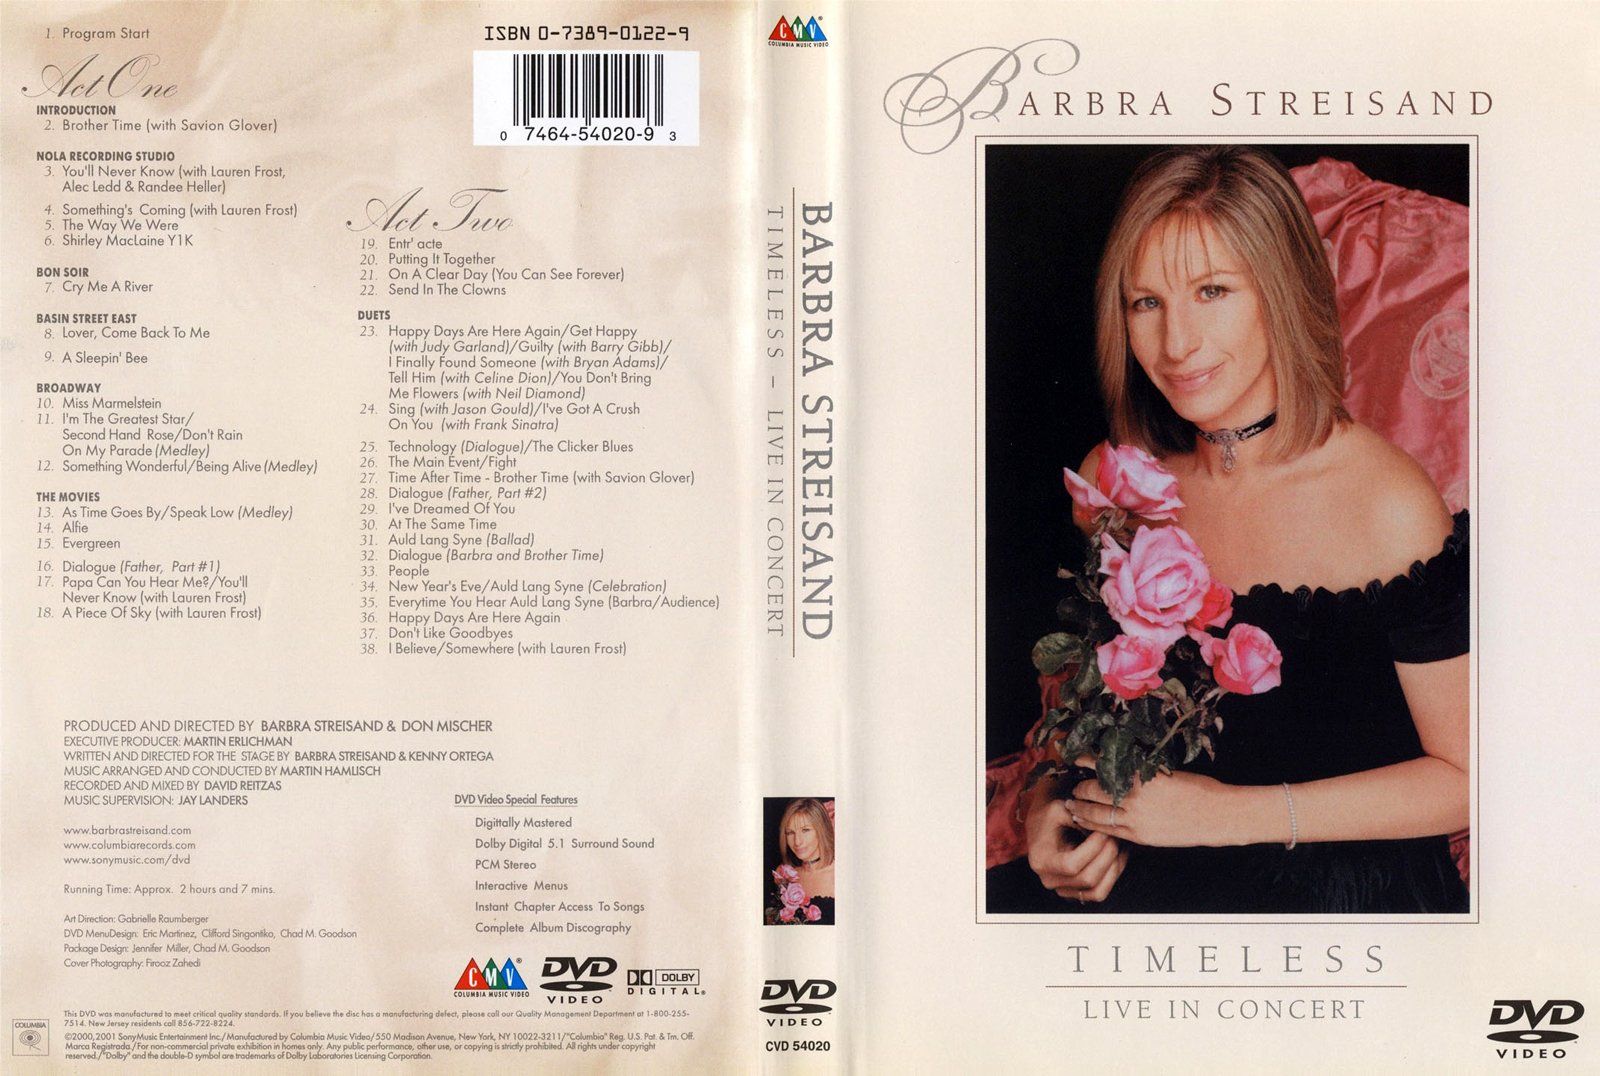 Front and back cover art for the Timeless DVD.